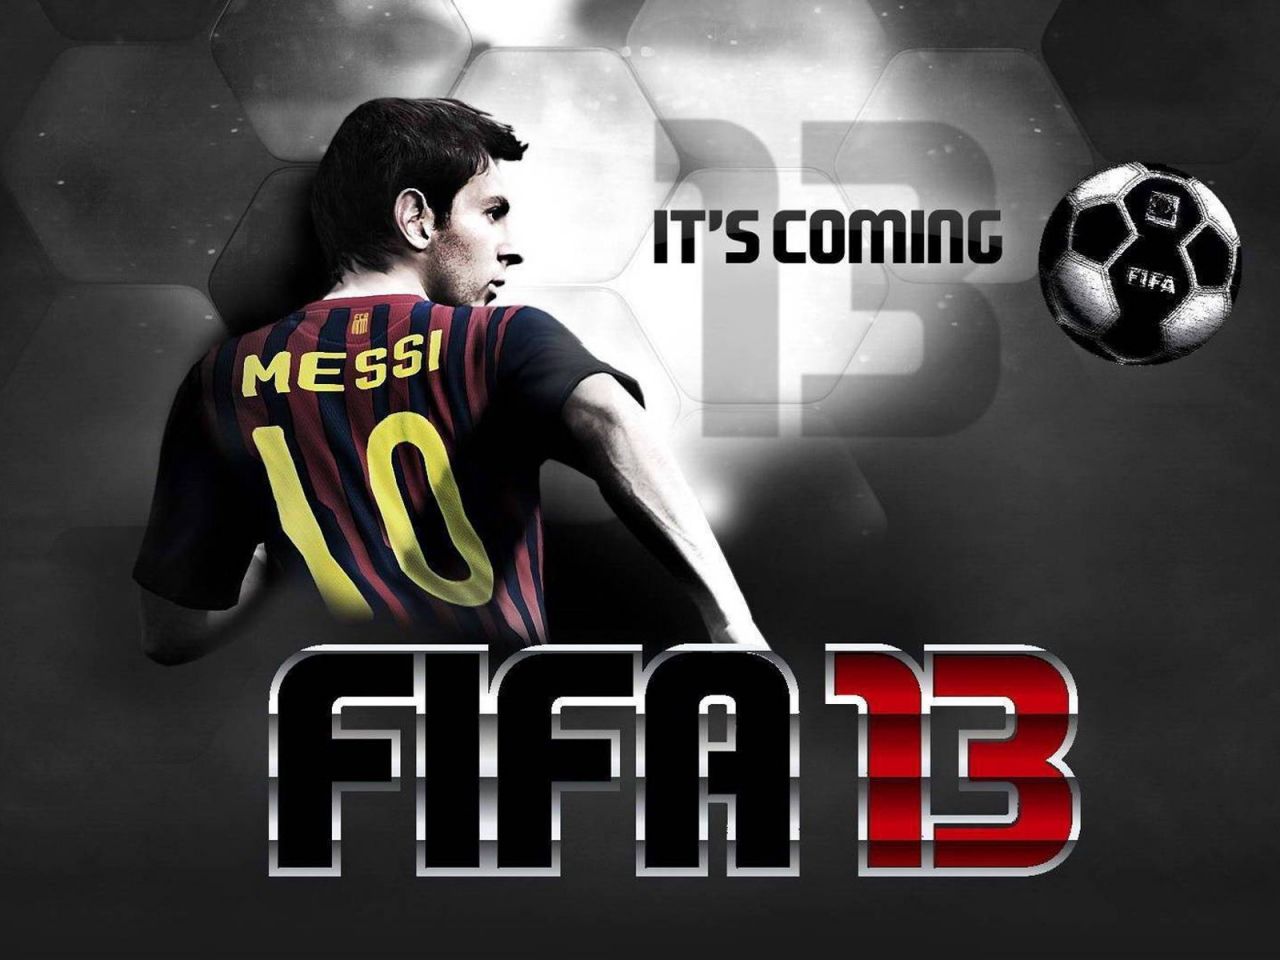 FIFA 13 for 1280 x 960 resolution